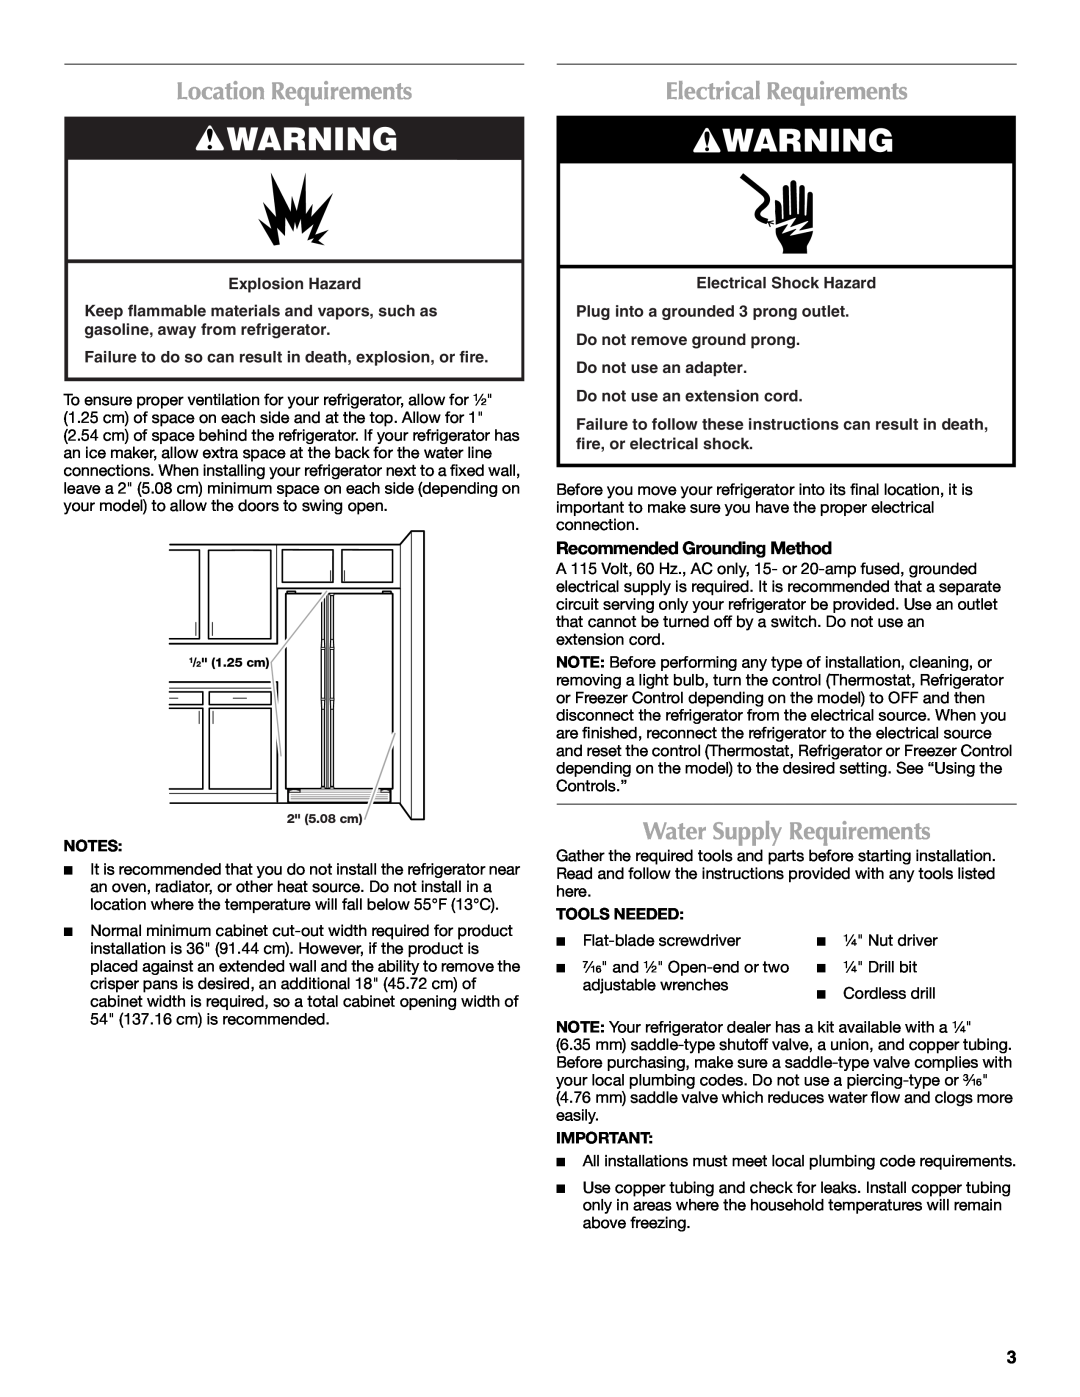 Maytag W10321476A Location Requirements, Electrical Requirements, Water Supply Requirements, Recommended Grounding Method 